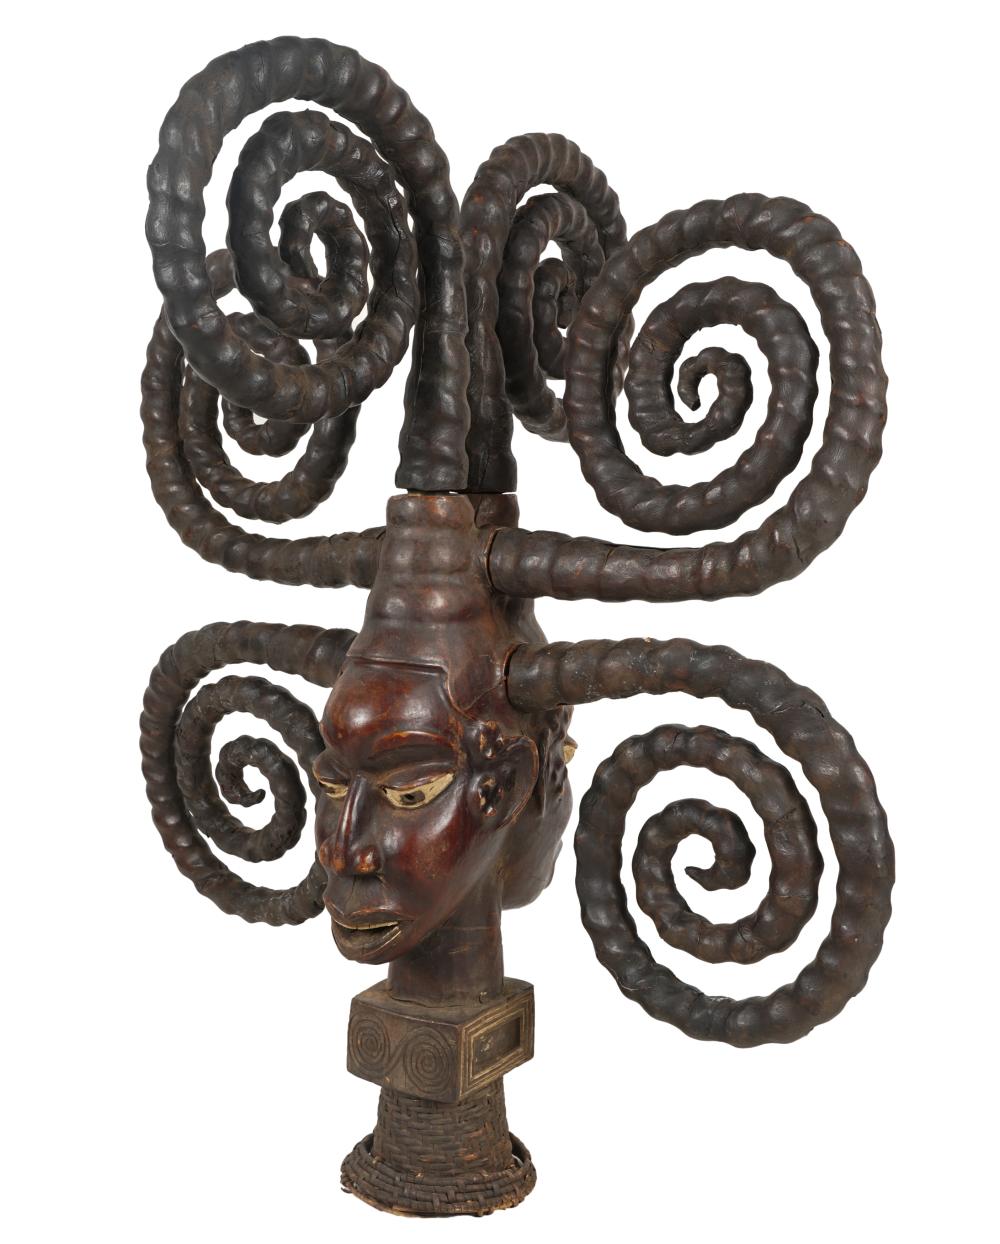 AFRICAN CARVED WOOD HEAD SCULPTUREAfrican